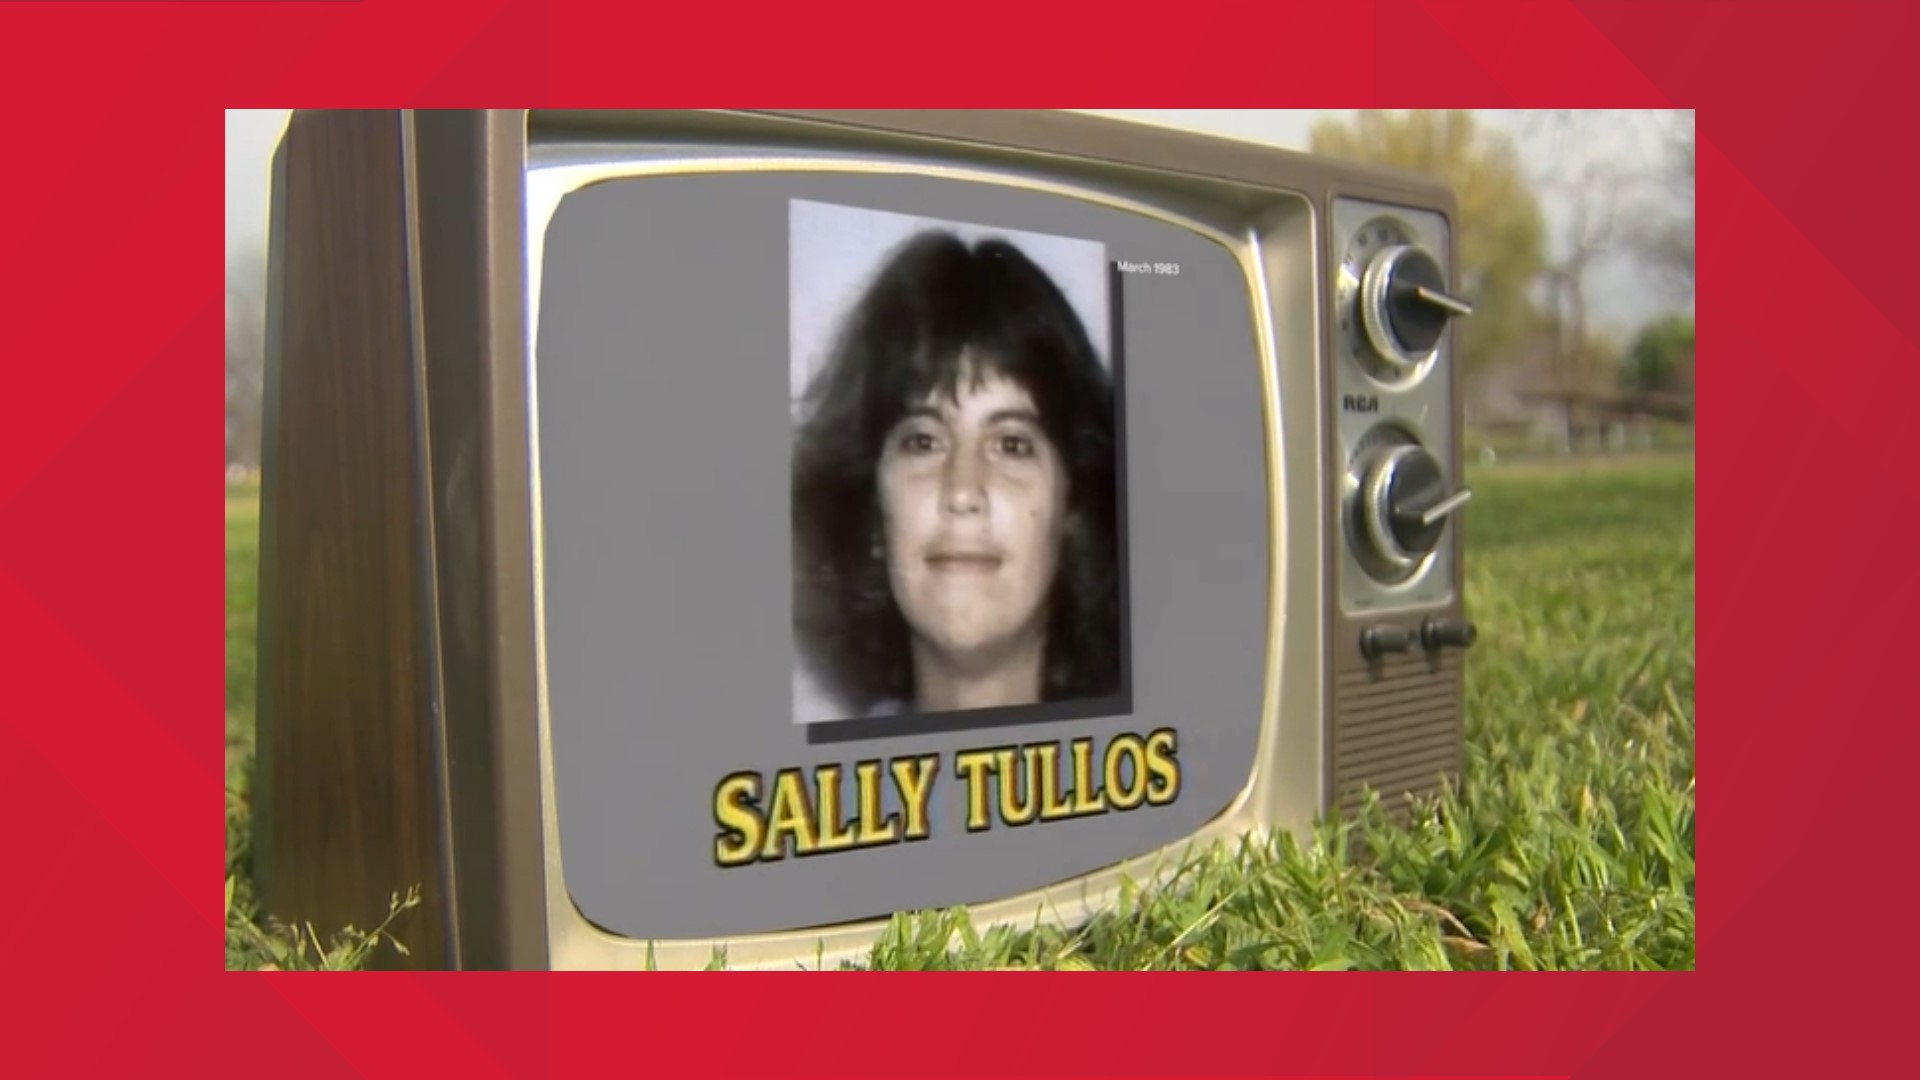 33-year-old Tullos was fatally stabbed and killed 41 years ago near Austin's Barton Creek Greenbelt.